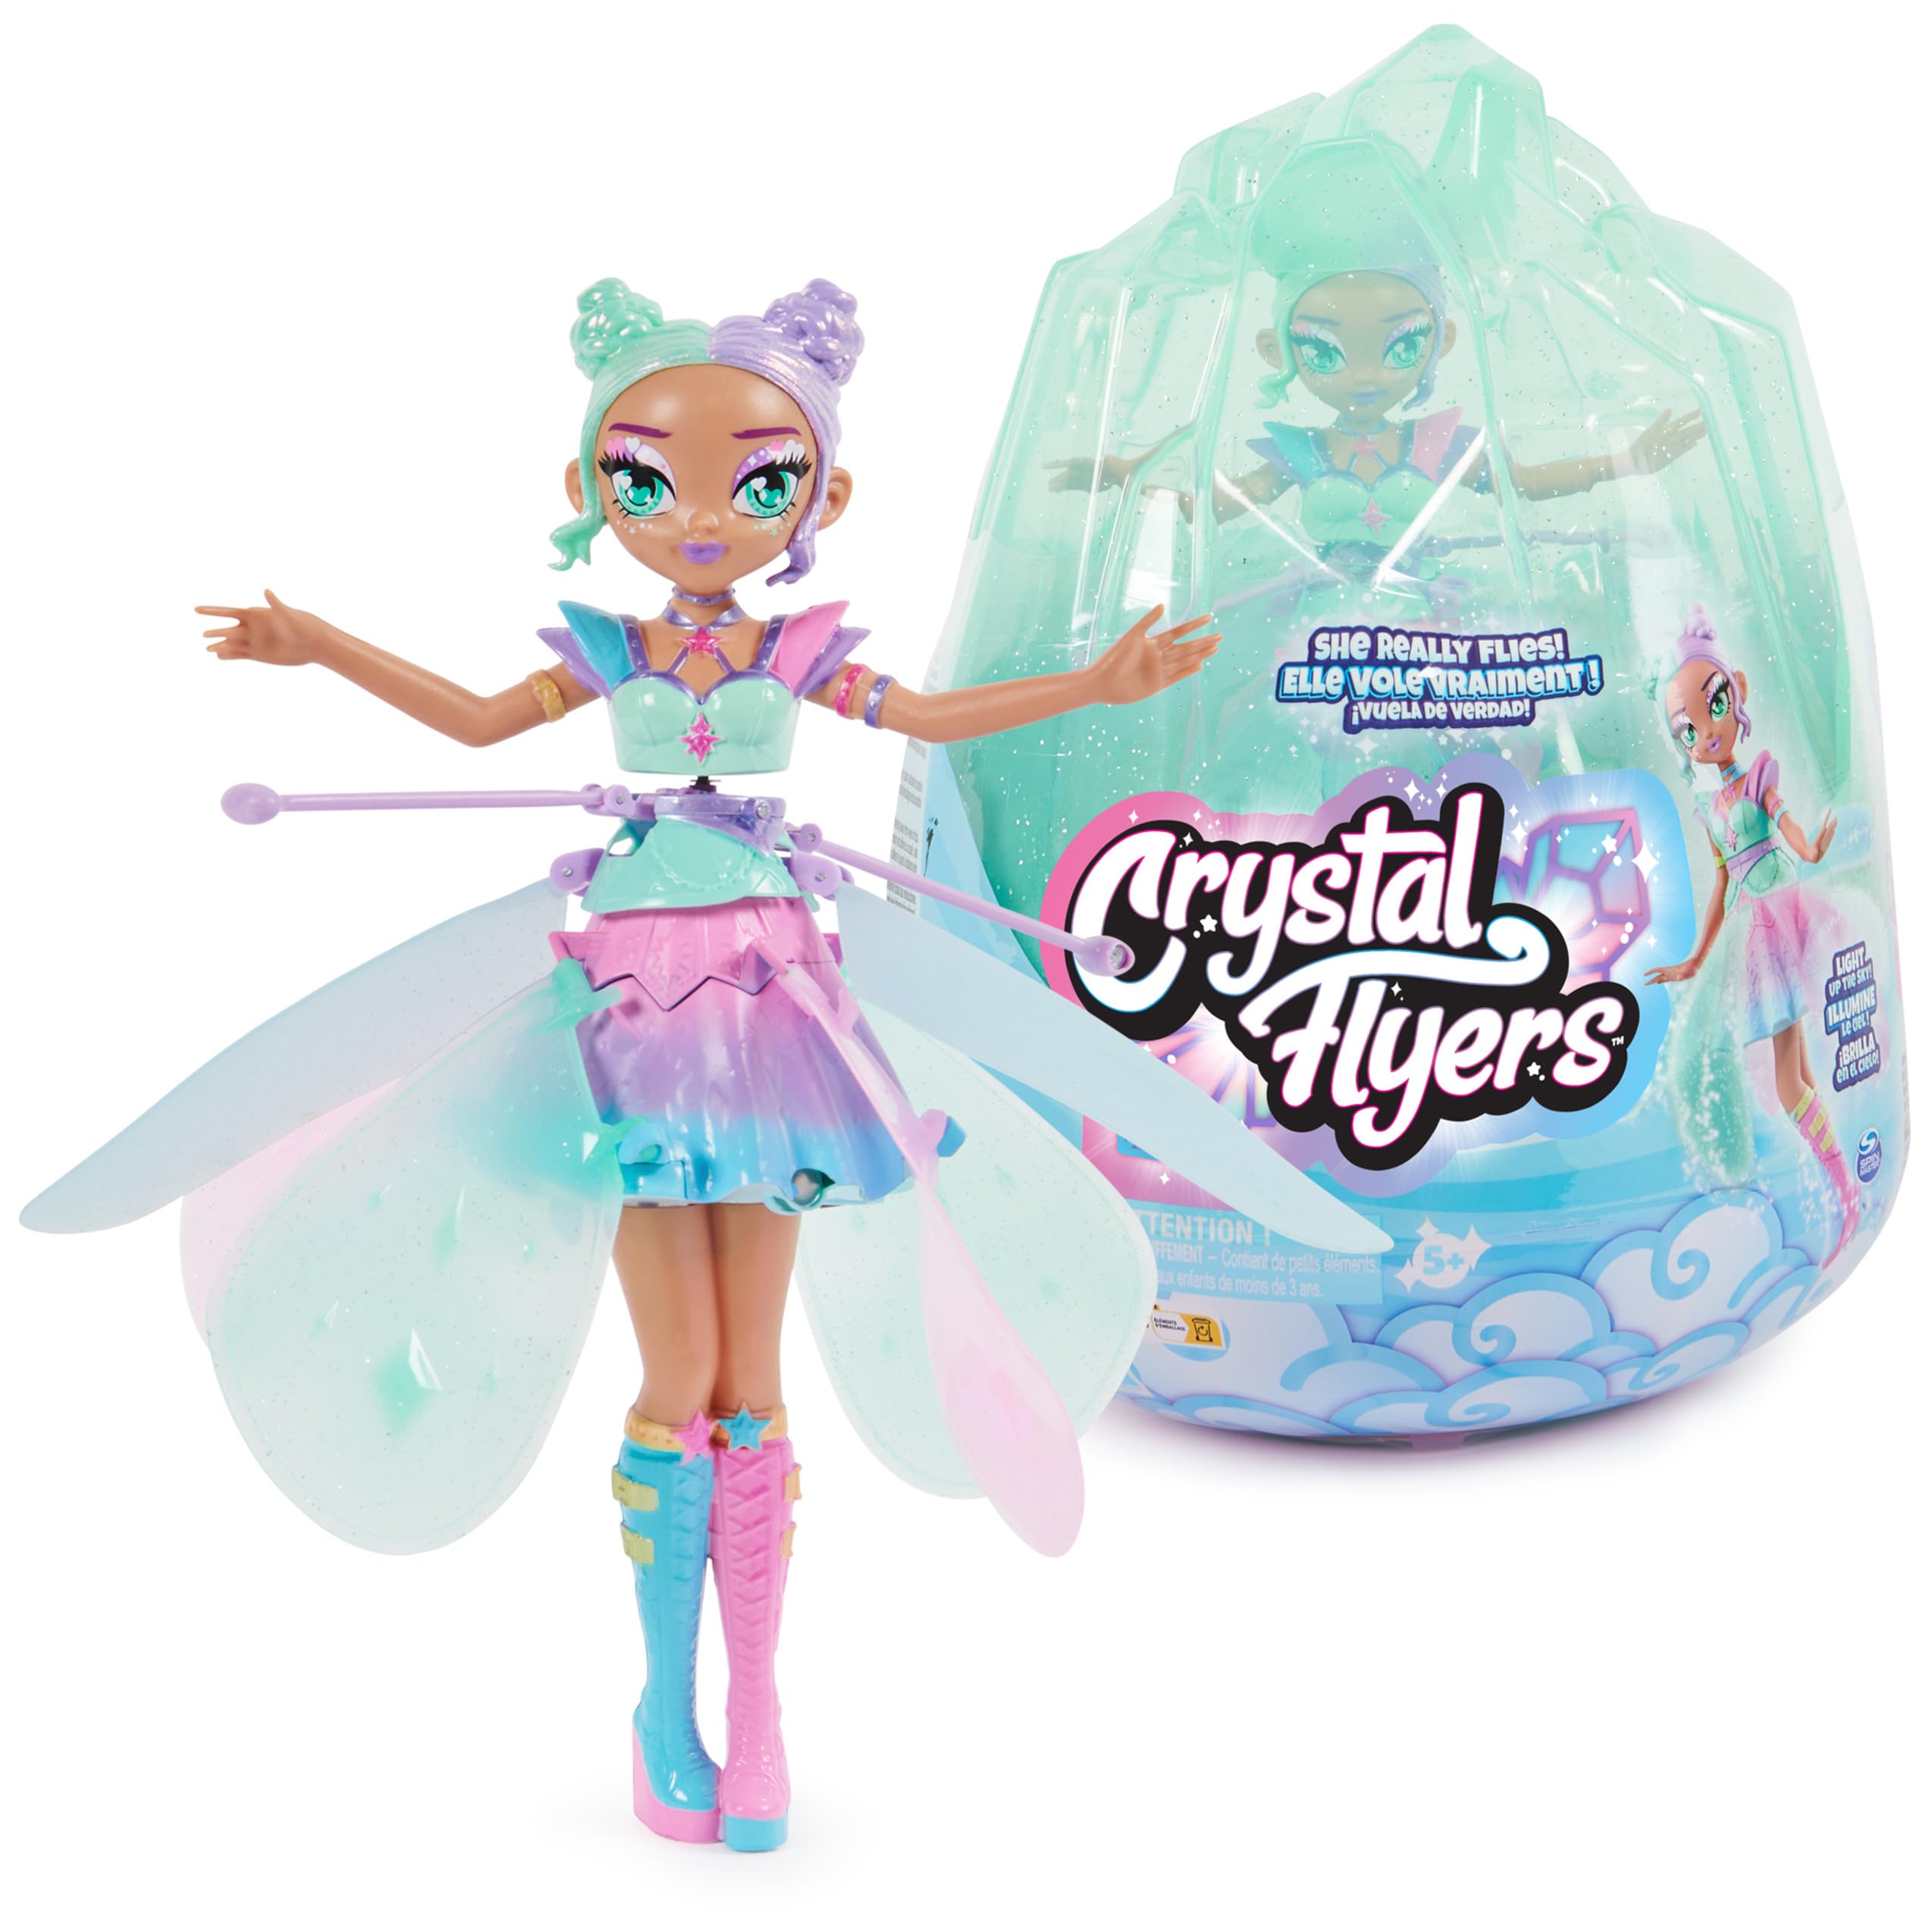 Hatchimals Crystal Flyers, Pastel Kawaii Doll Magical Flying Toy with Lights (Packaging May Vary), Kids Toys for Girls and Boys Ages 5 and Up